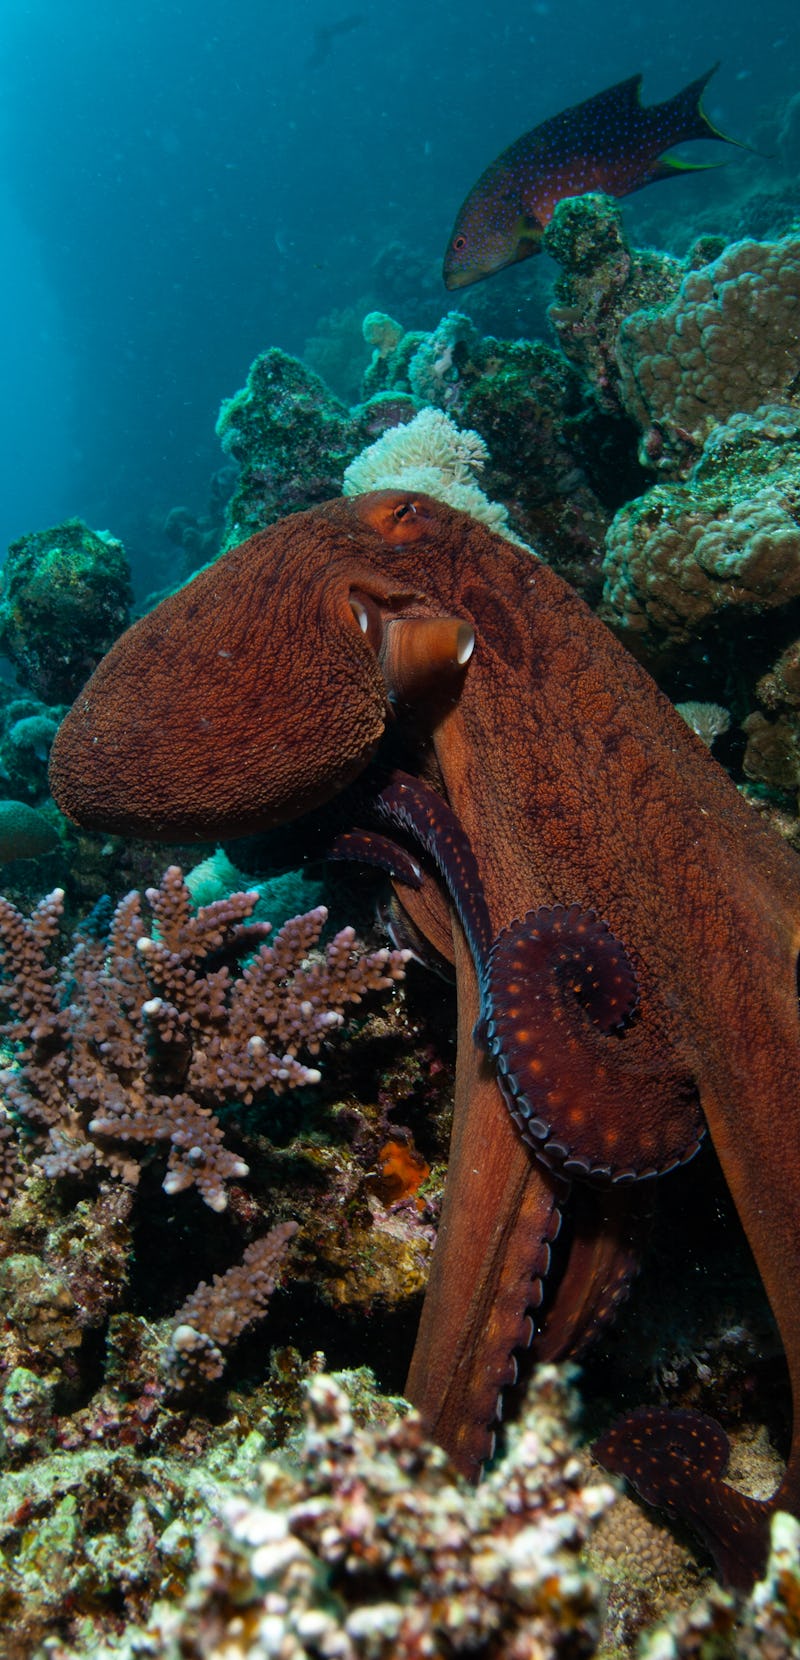 Red octopus on a coral reef. Octapus cyanea